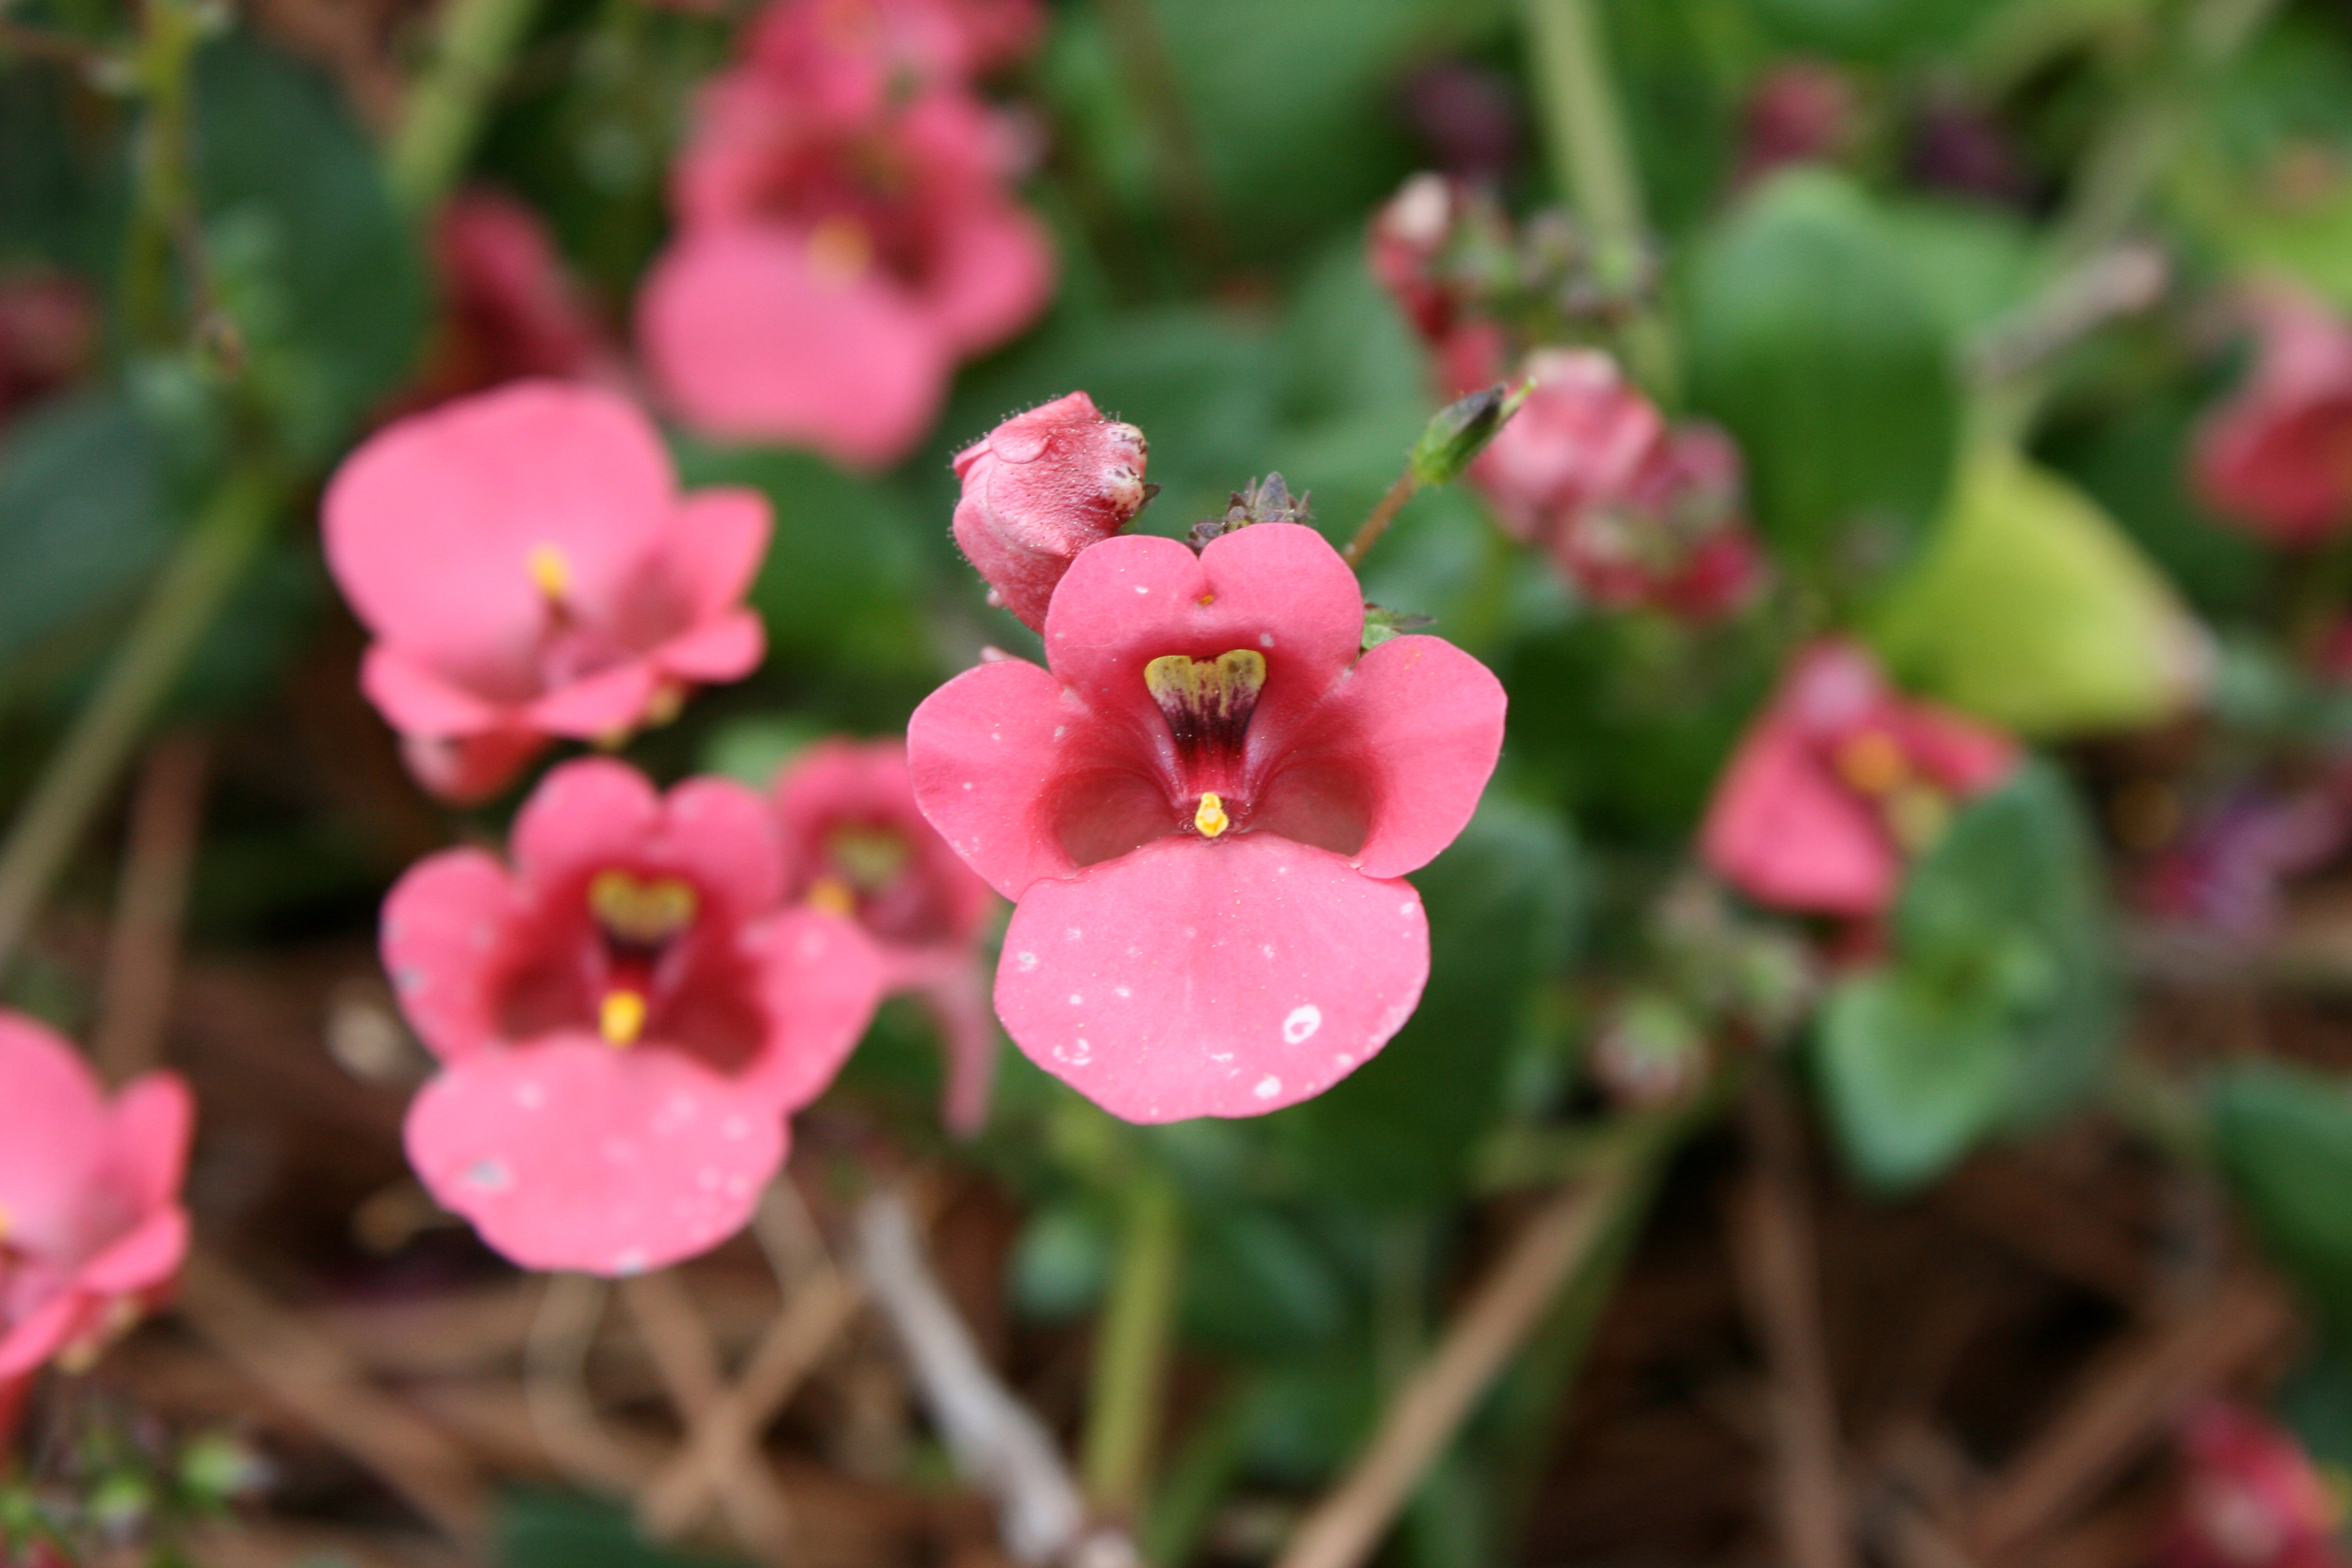 File:Cute pink flowers with fangs.jpg - Wikimedia Commons